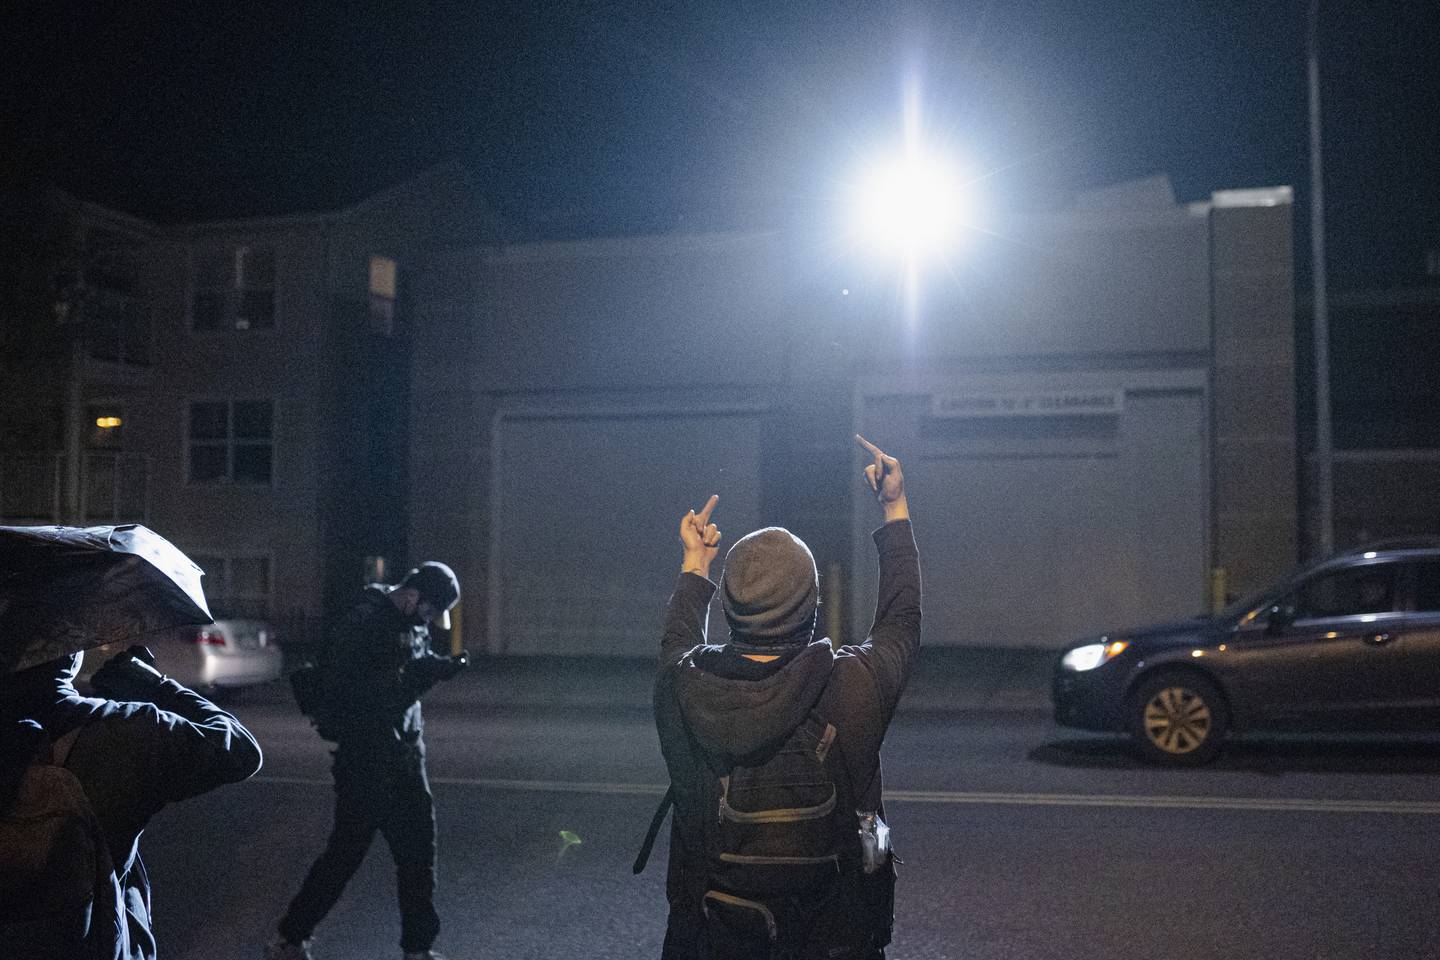 A protester gives two middle fingers to a police building.